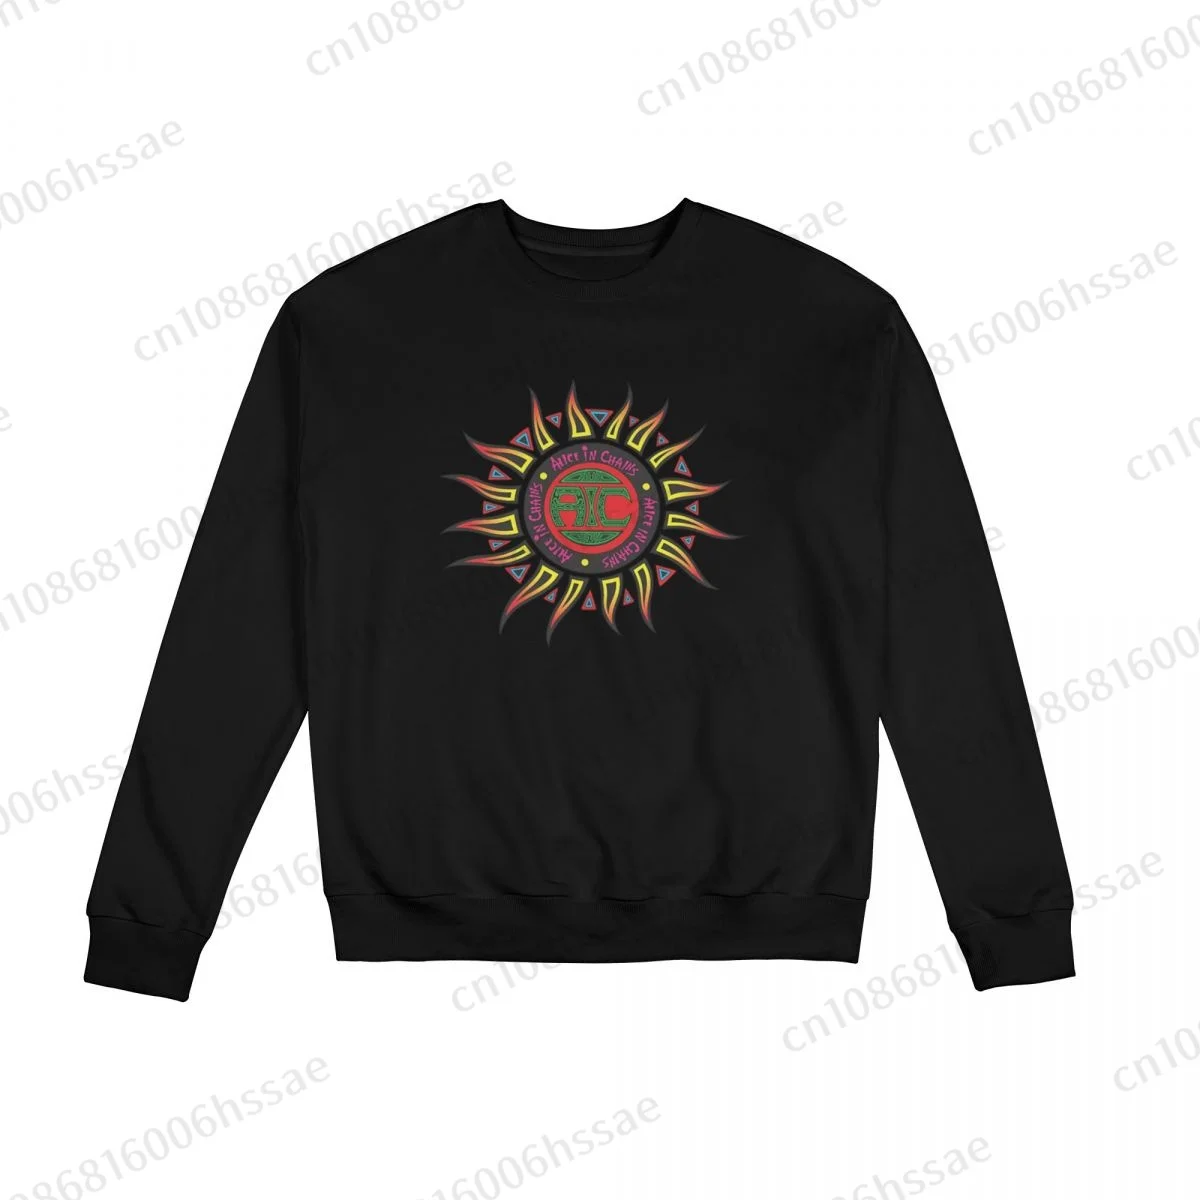 

Alice In Chains Metal Rock Band Men Woman Fall Winter Sweatshirt Round Neck Long Sleeve Length Casual Top